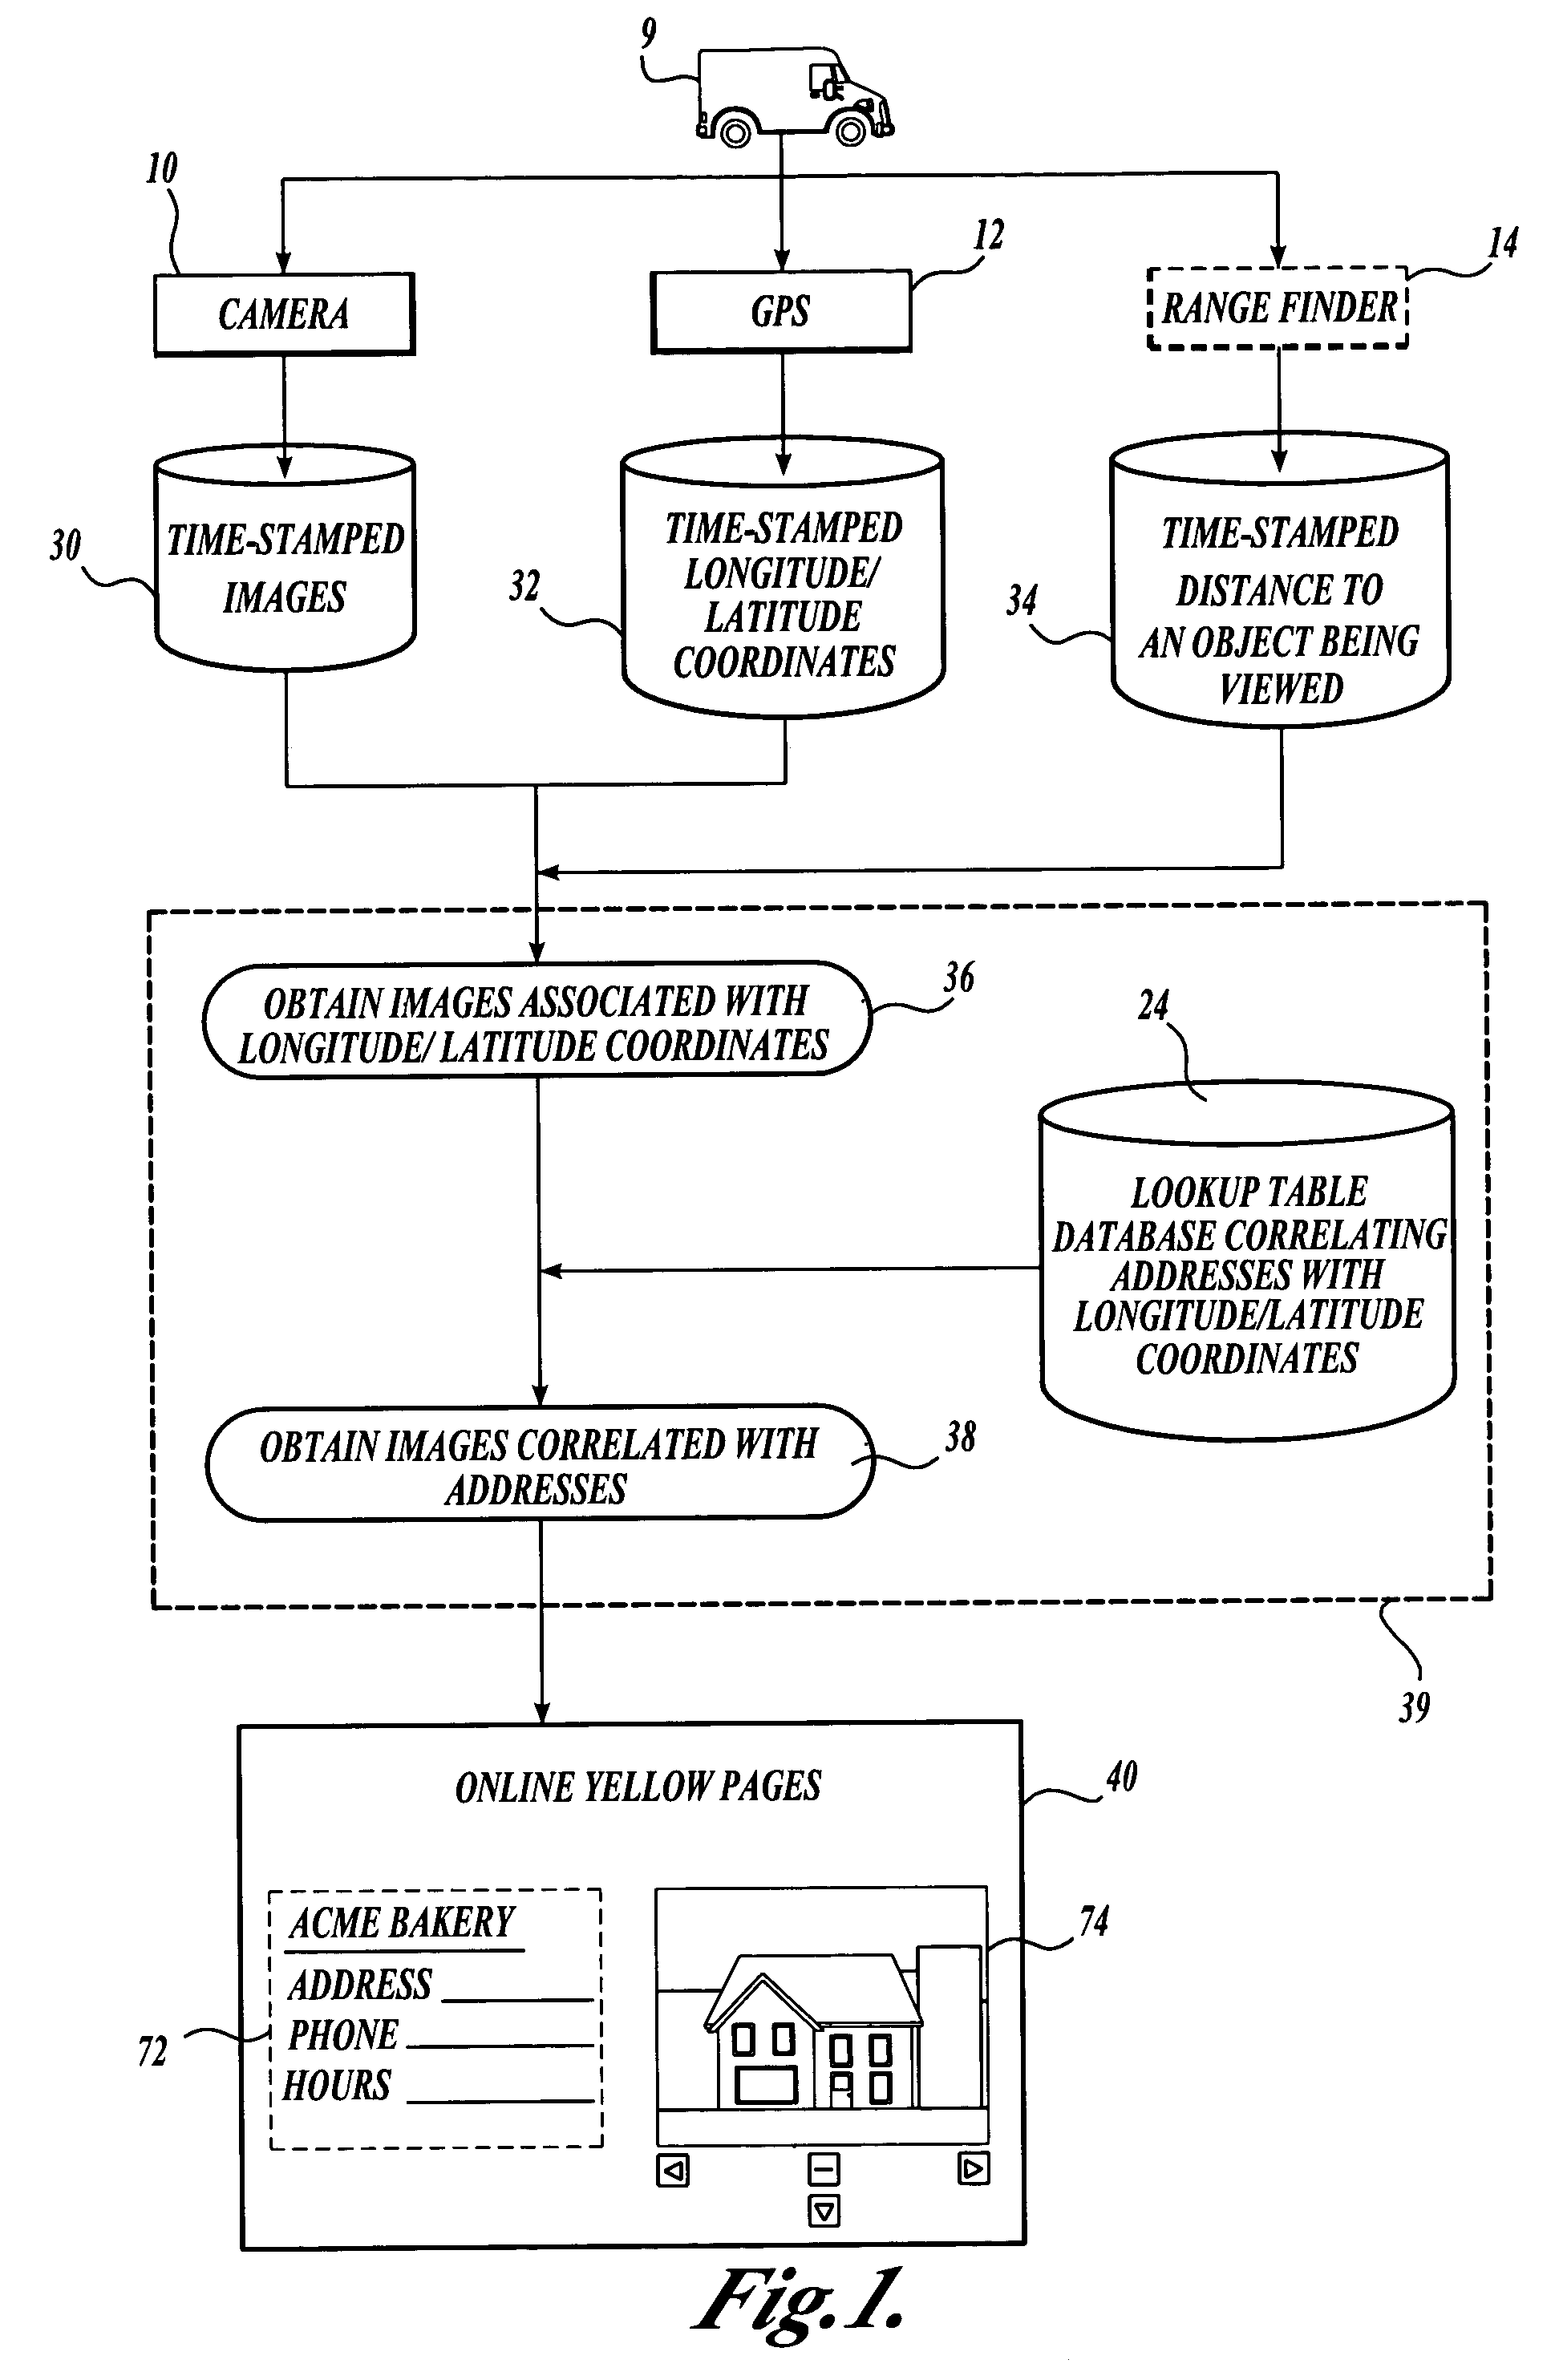 System and method for automatically collecting images of objects at geographic locations and displaying same in online directories